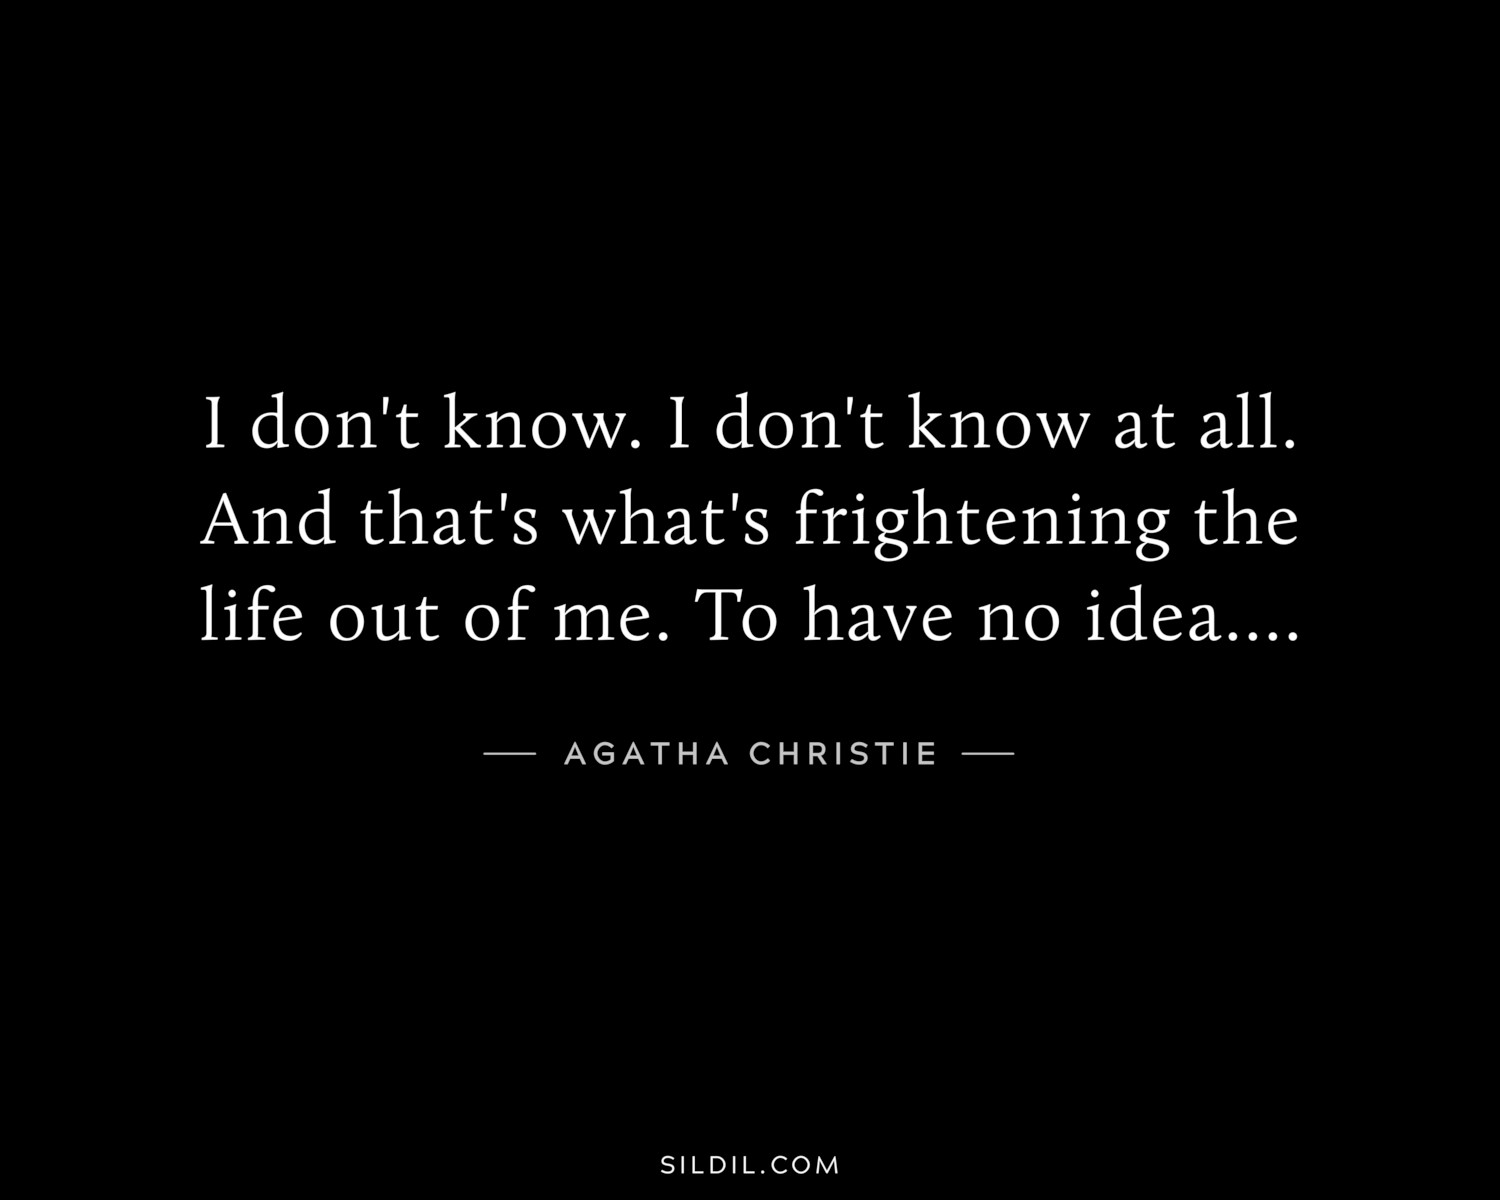 I don't know. I don't know at all. And that's what's frightening the life out of me. To have no idea....